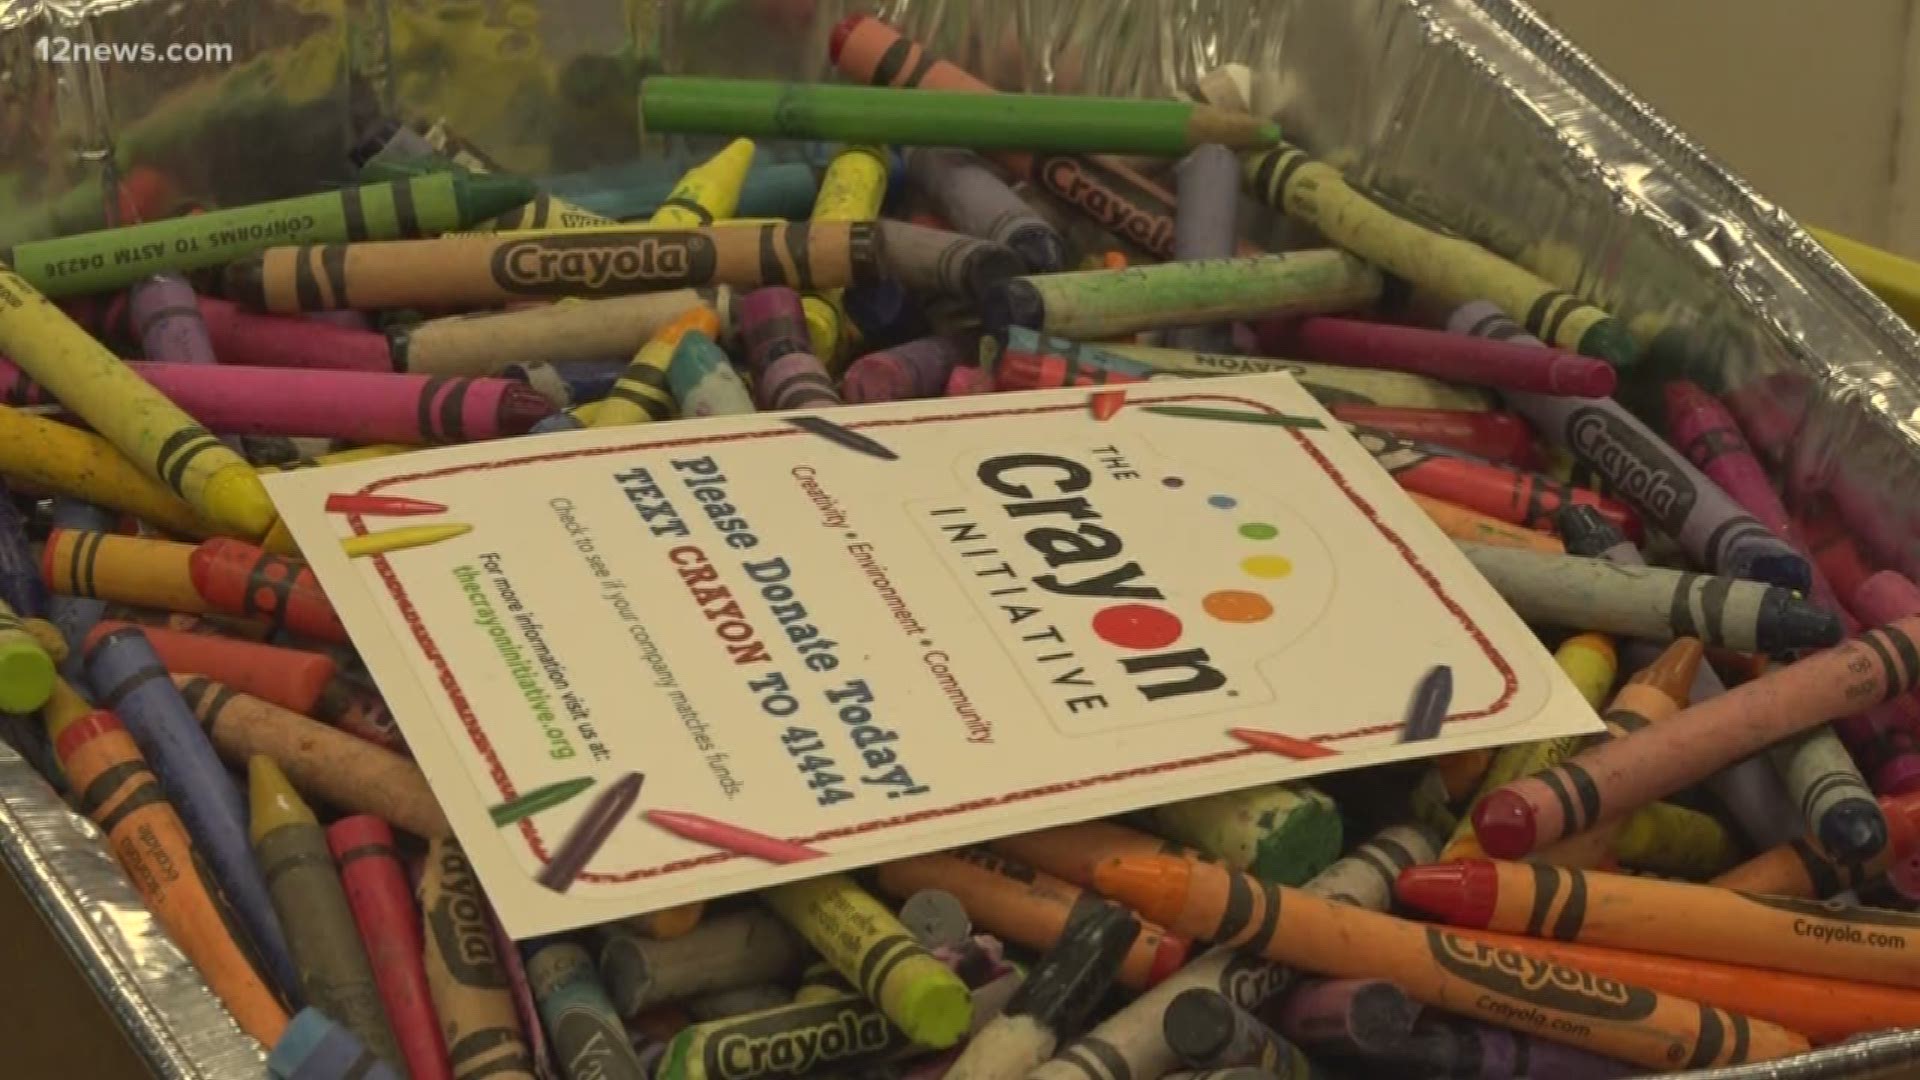 The Crayon Initiative is turning trash into treasure. And the final product product is making sick children's lives brighter.